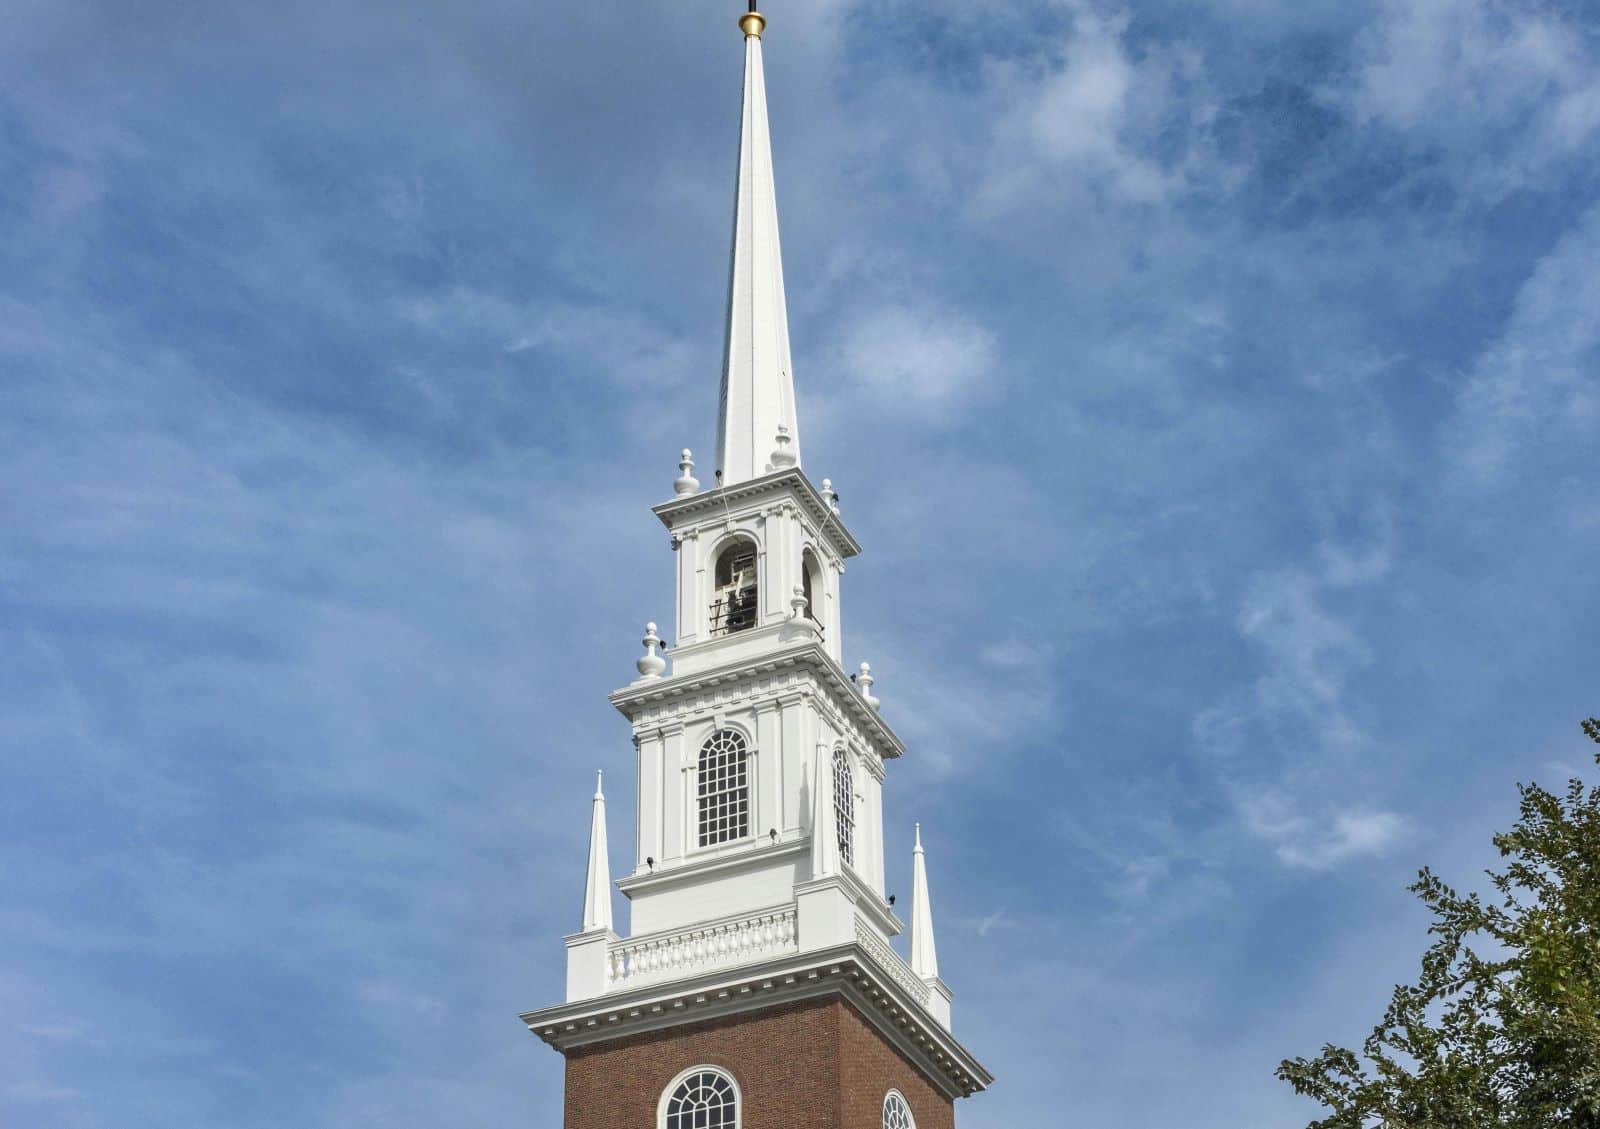 <p class="wp-caption-text">Image Credit: Pexels / Phil Evenden</p>  <p>Old North Church, famous for the “One if by land, and two if by sea” signal, is an active Episcopal church that welcomes visitors to attend services or tour the historic site.</p>